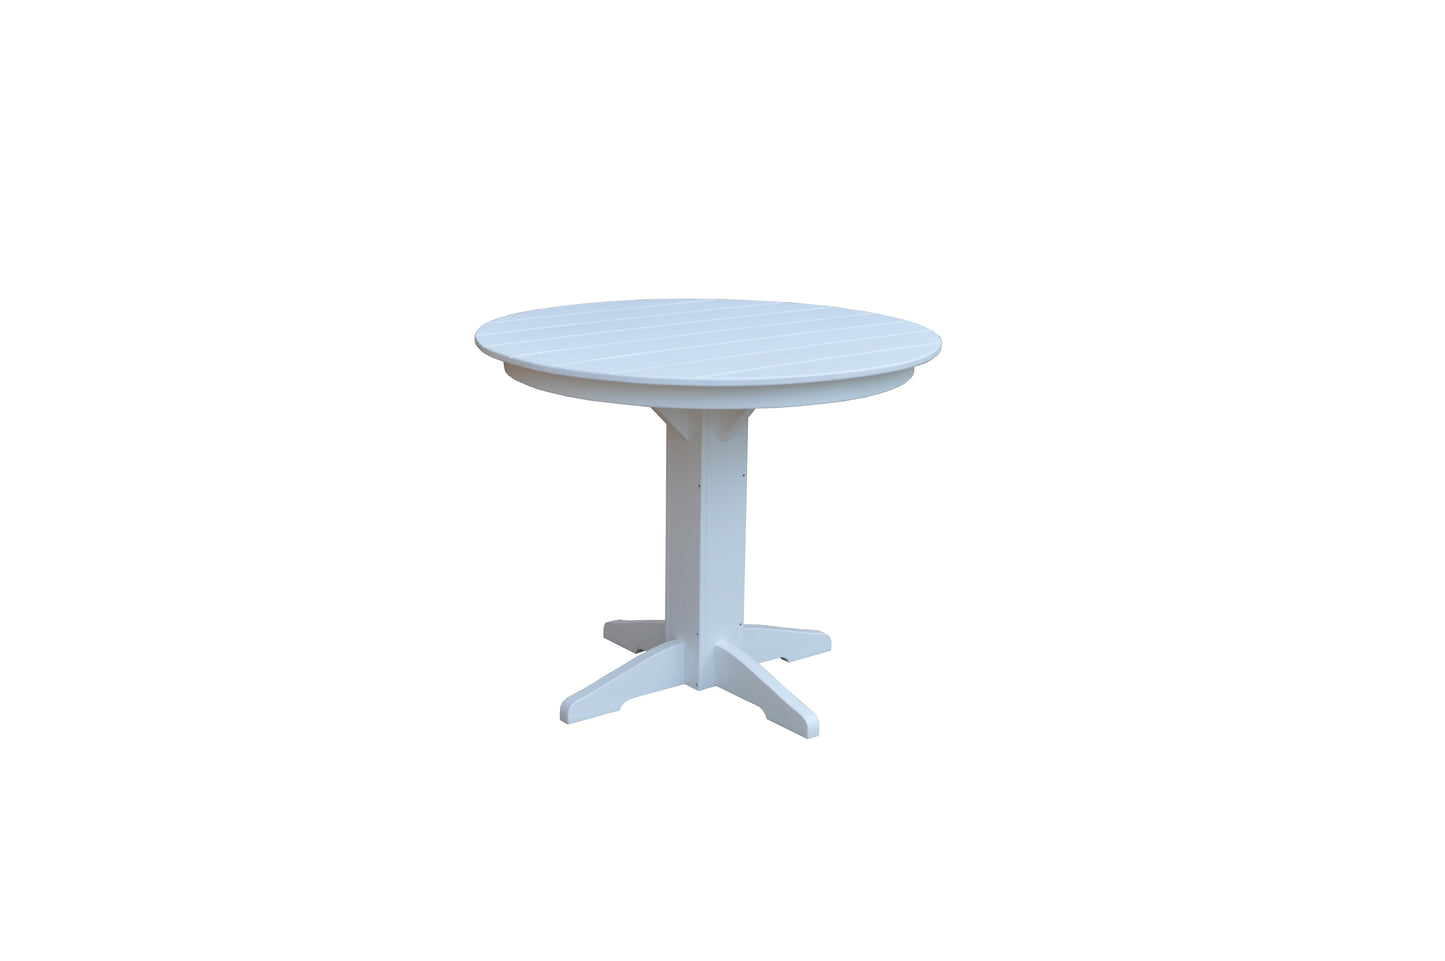 A&L Furniture Co. Recycled Plastic 44" Round Table 4'Oval Table (Counter Height) - LEAD TIME TO SHIP 10 BUSINESS DAYS